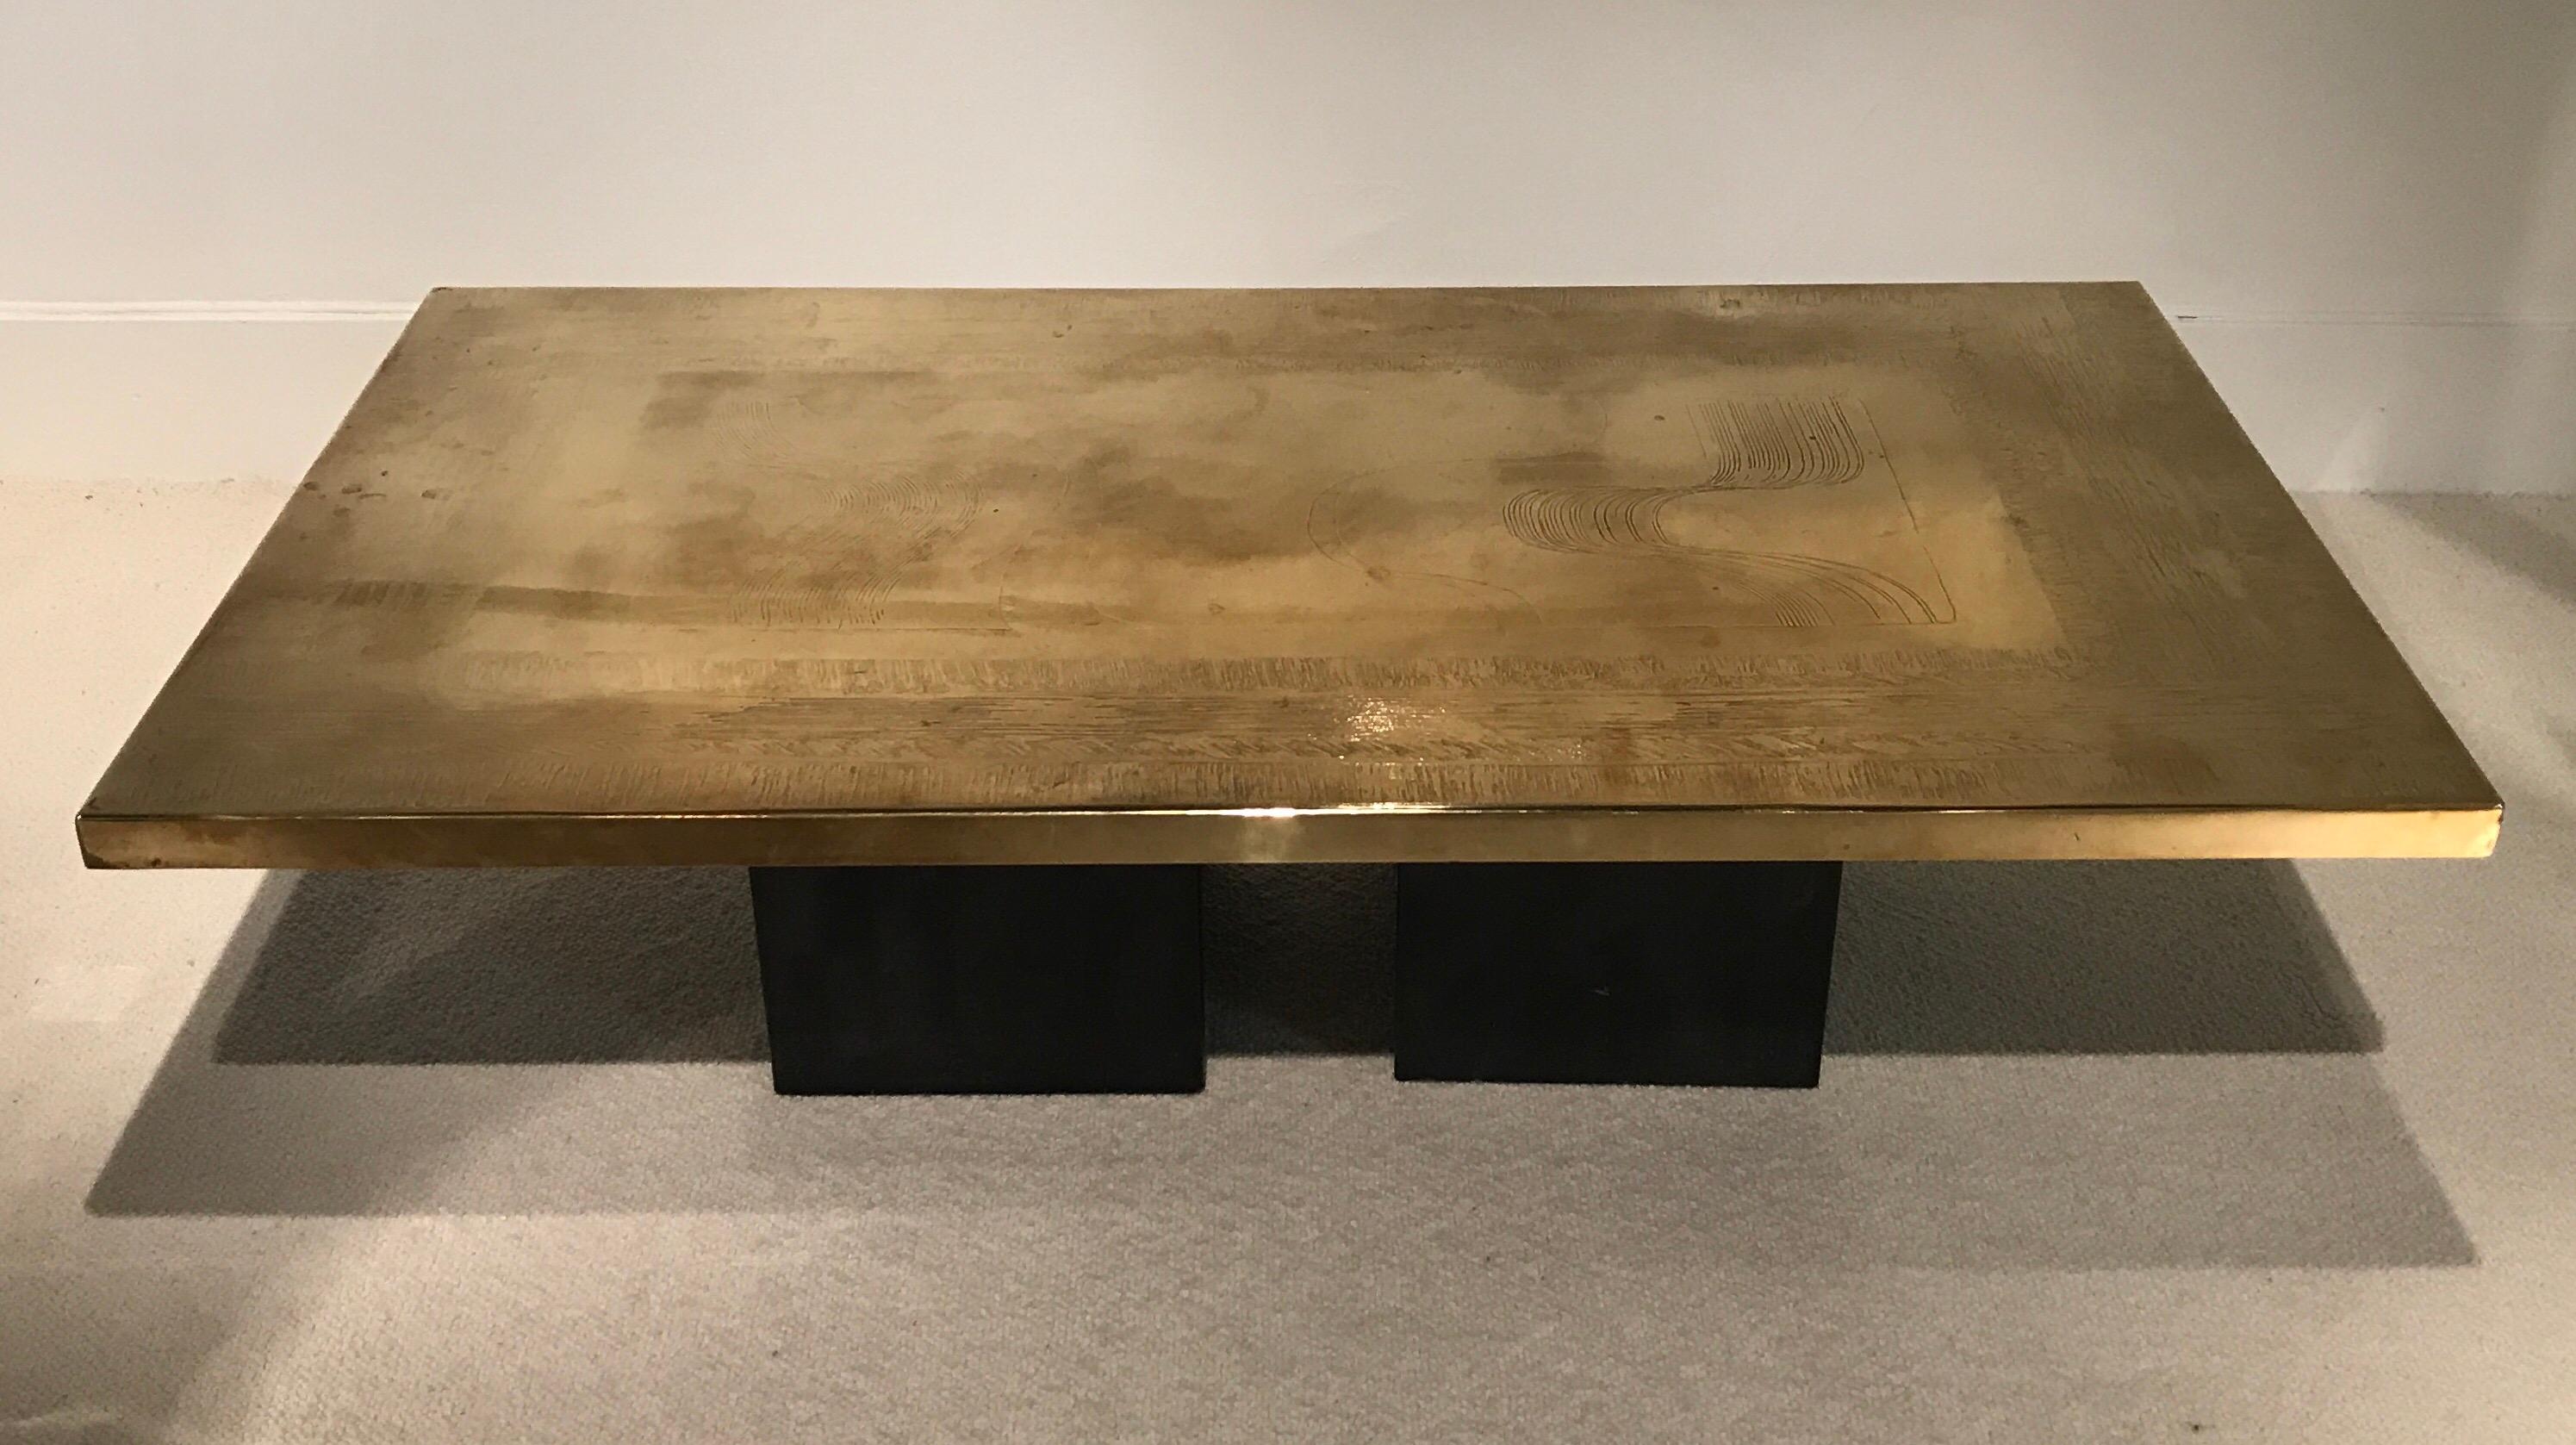 1970s Christian Heckscher etched brass coffee table;
Signed by the artist on the top
Black iron feet in original condition.